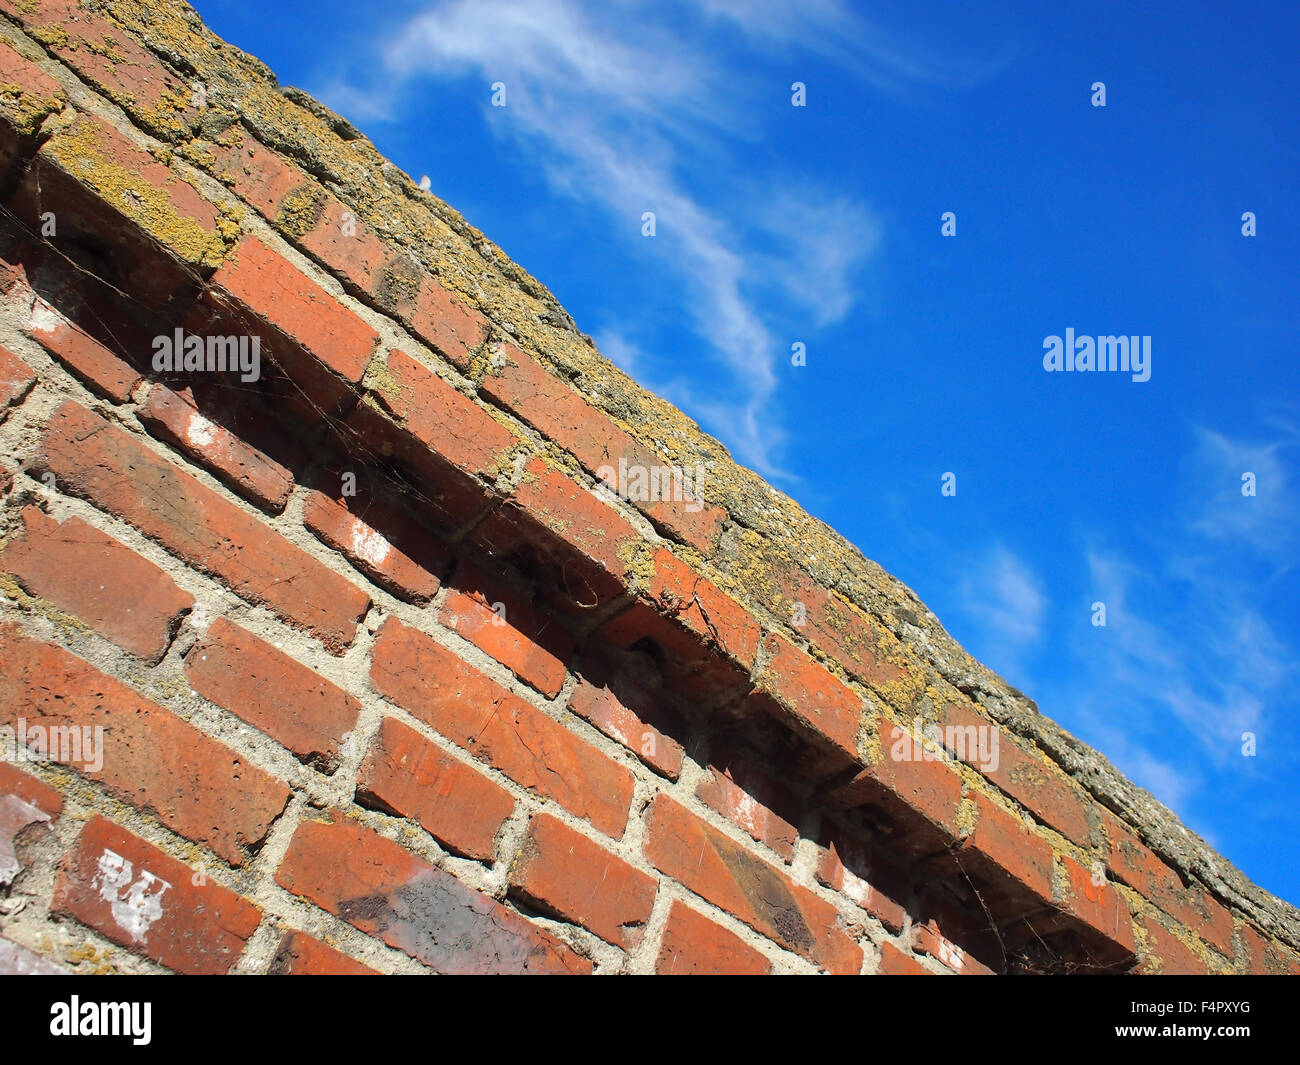 Bottom view on a fragment of an old brick fence against a bright blue sky with clouds on the diagonal of the frame. Stock Photo